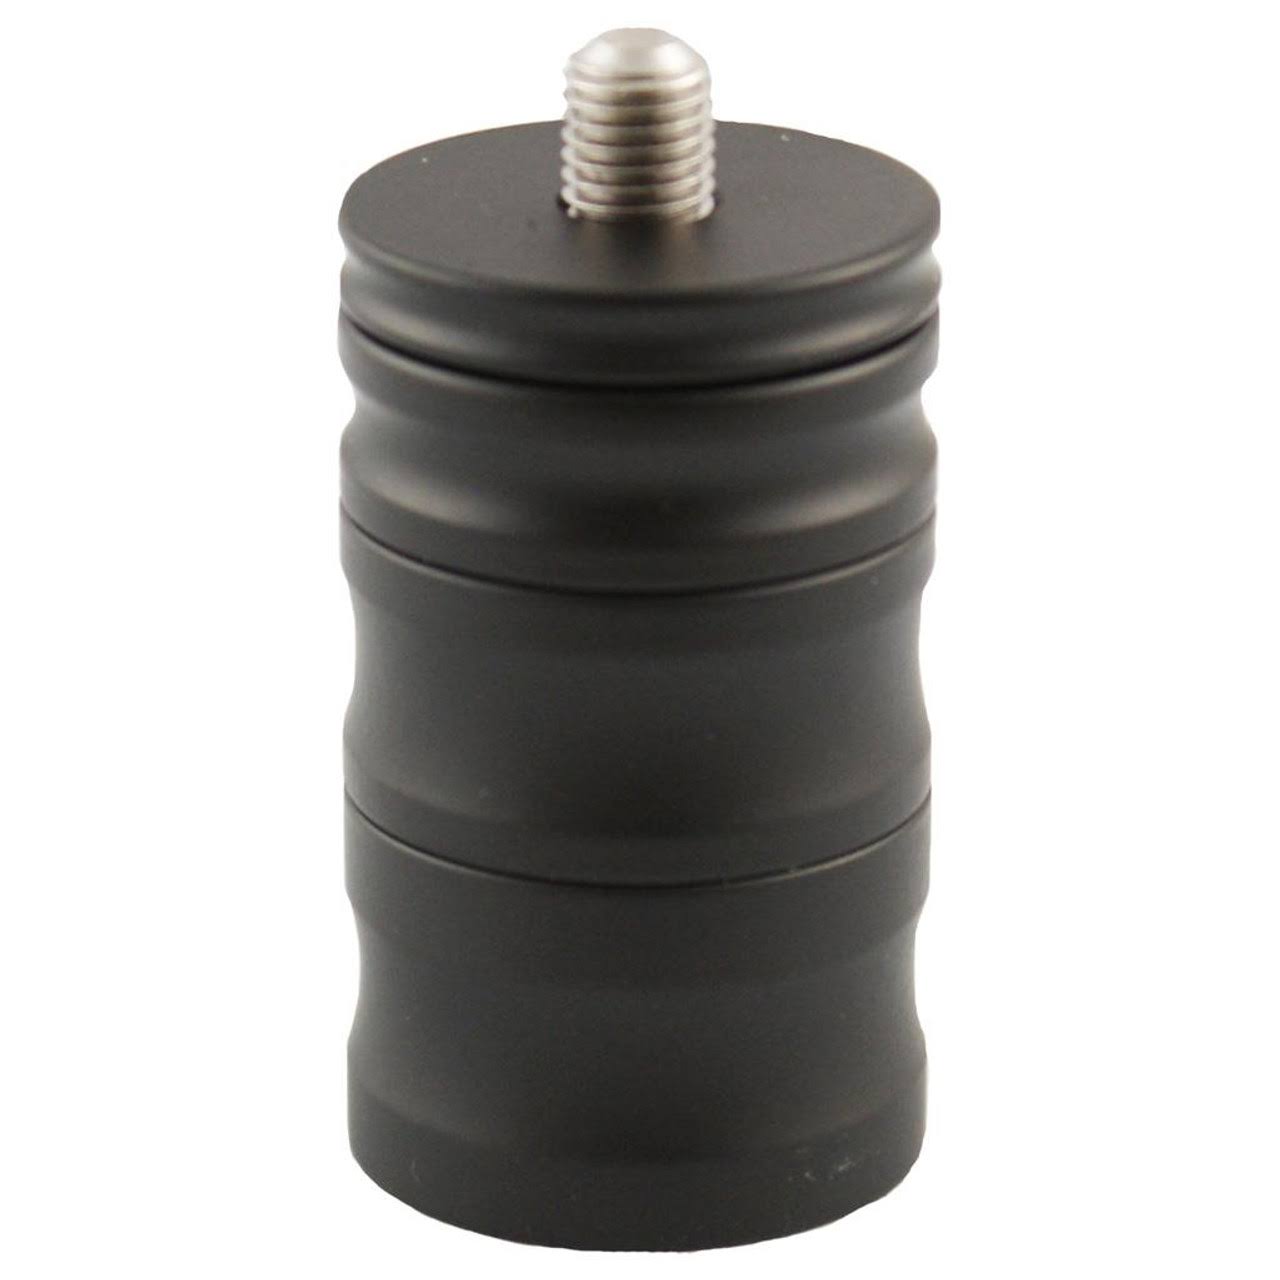 Bowfinger Stainless Steel Stack Weights - Black, 10oz